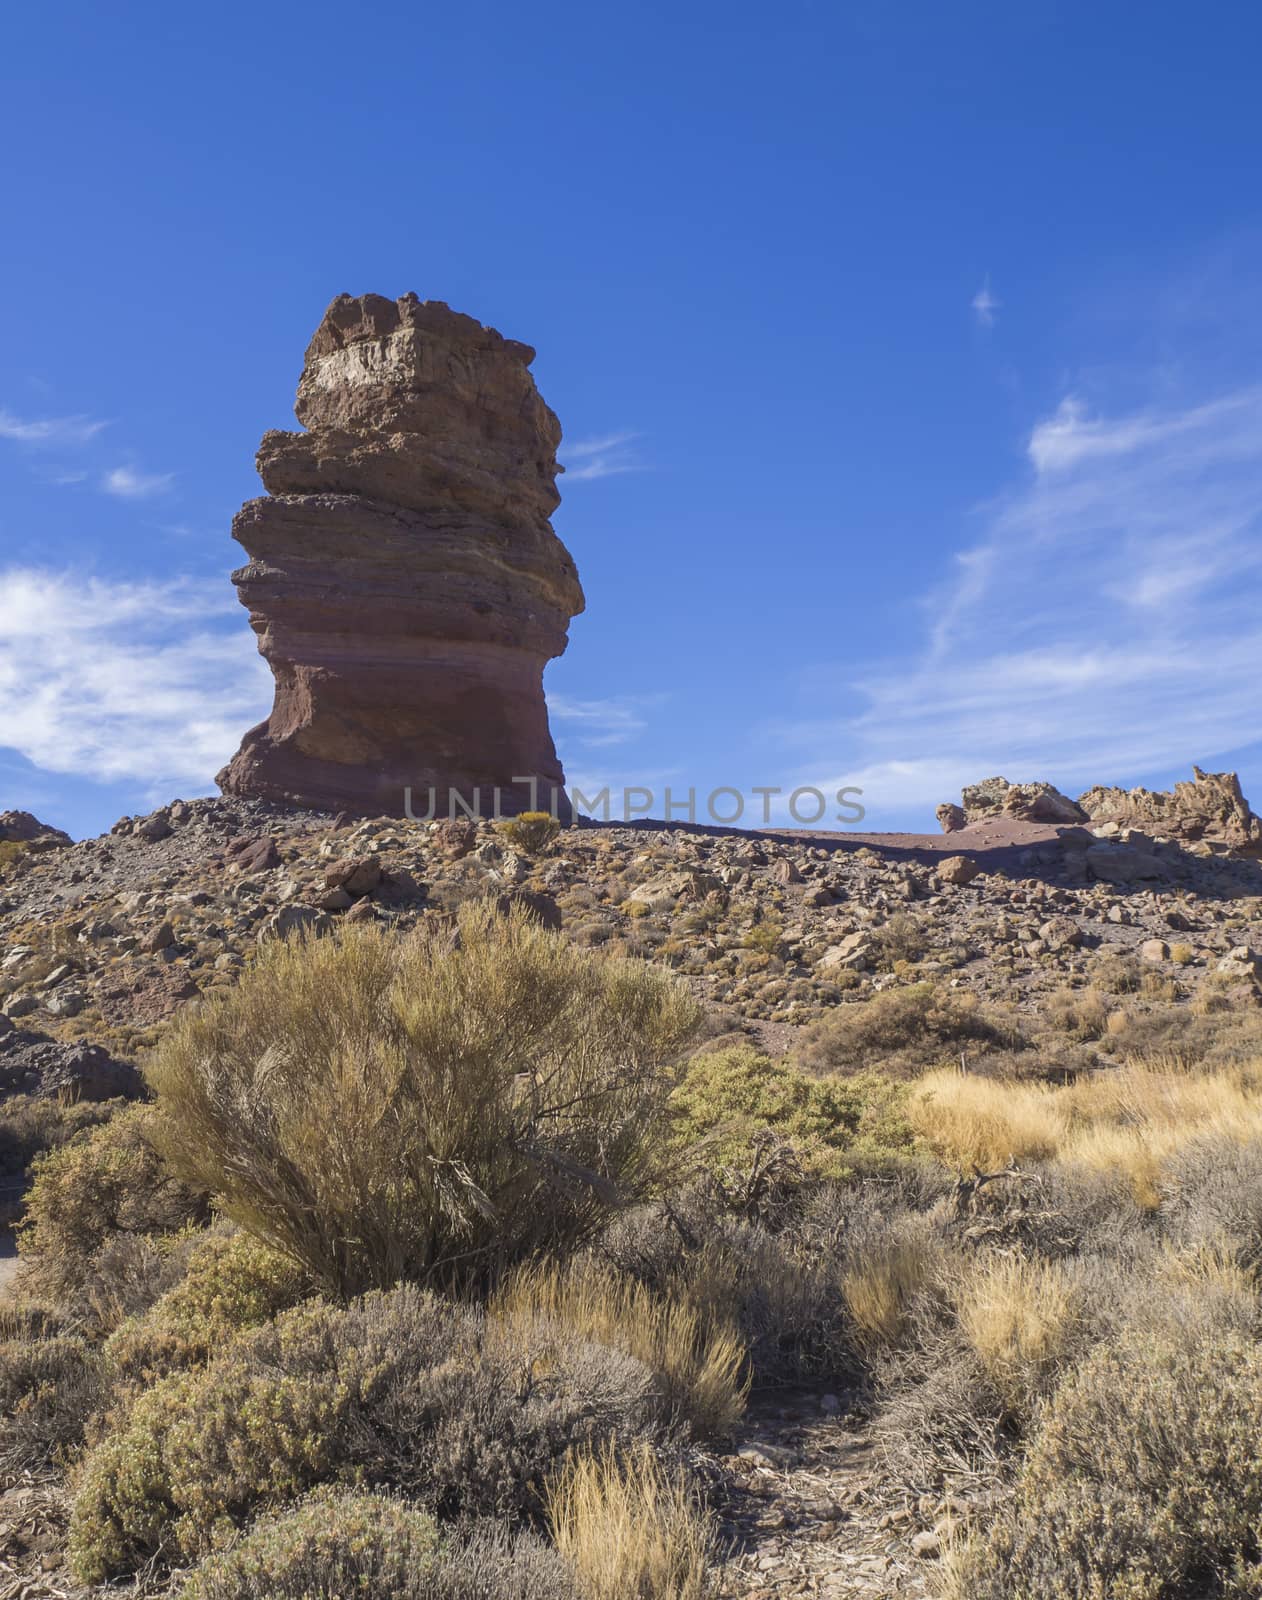 view on Roque Cinchado gods finger, famous rock formation in Roques de Garcia el teide national park with dry vegetation and clear blue sky